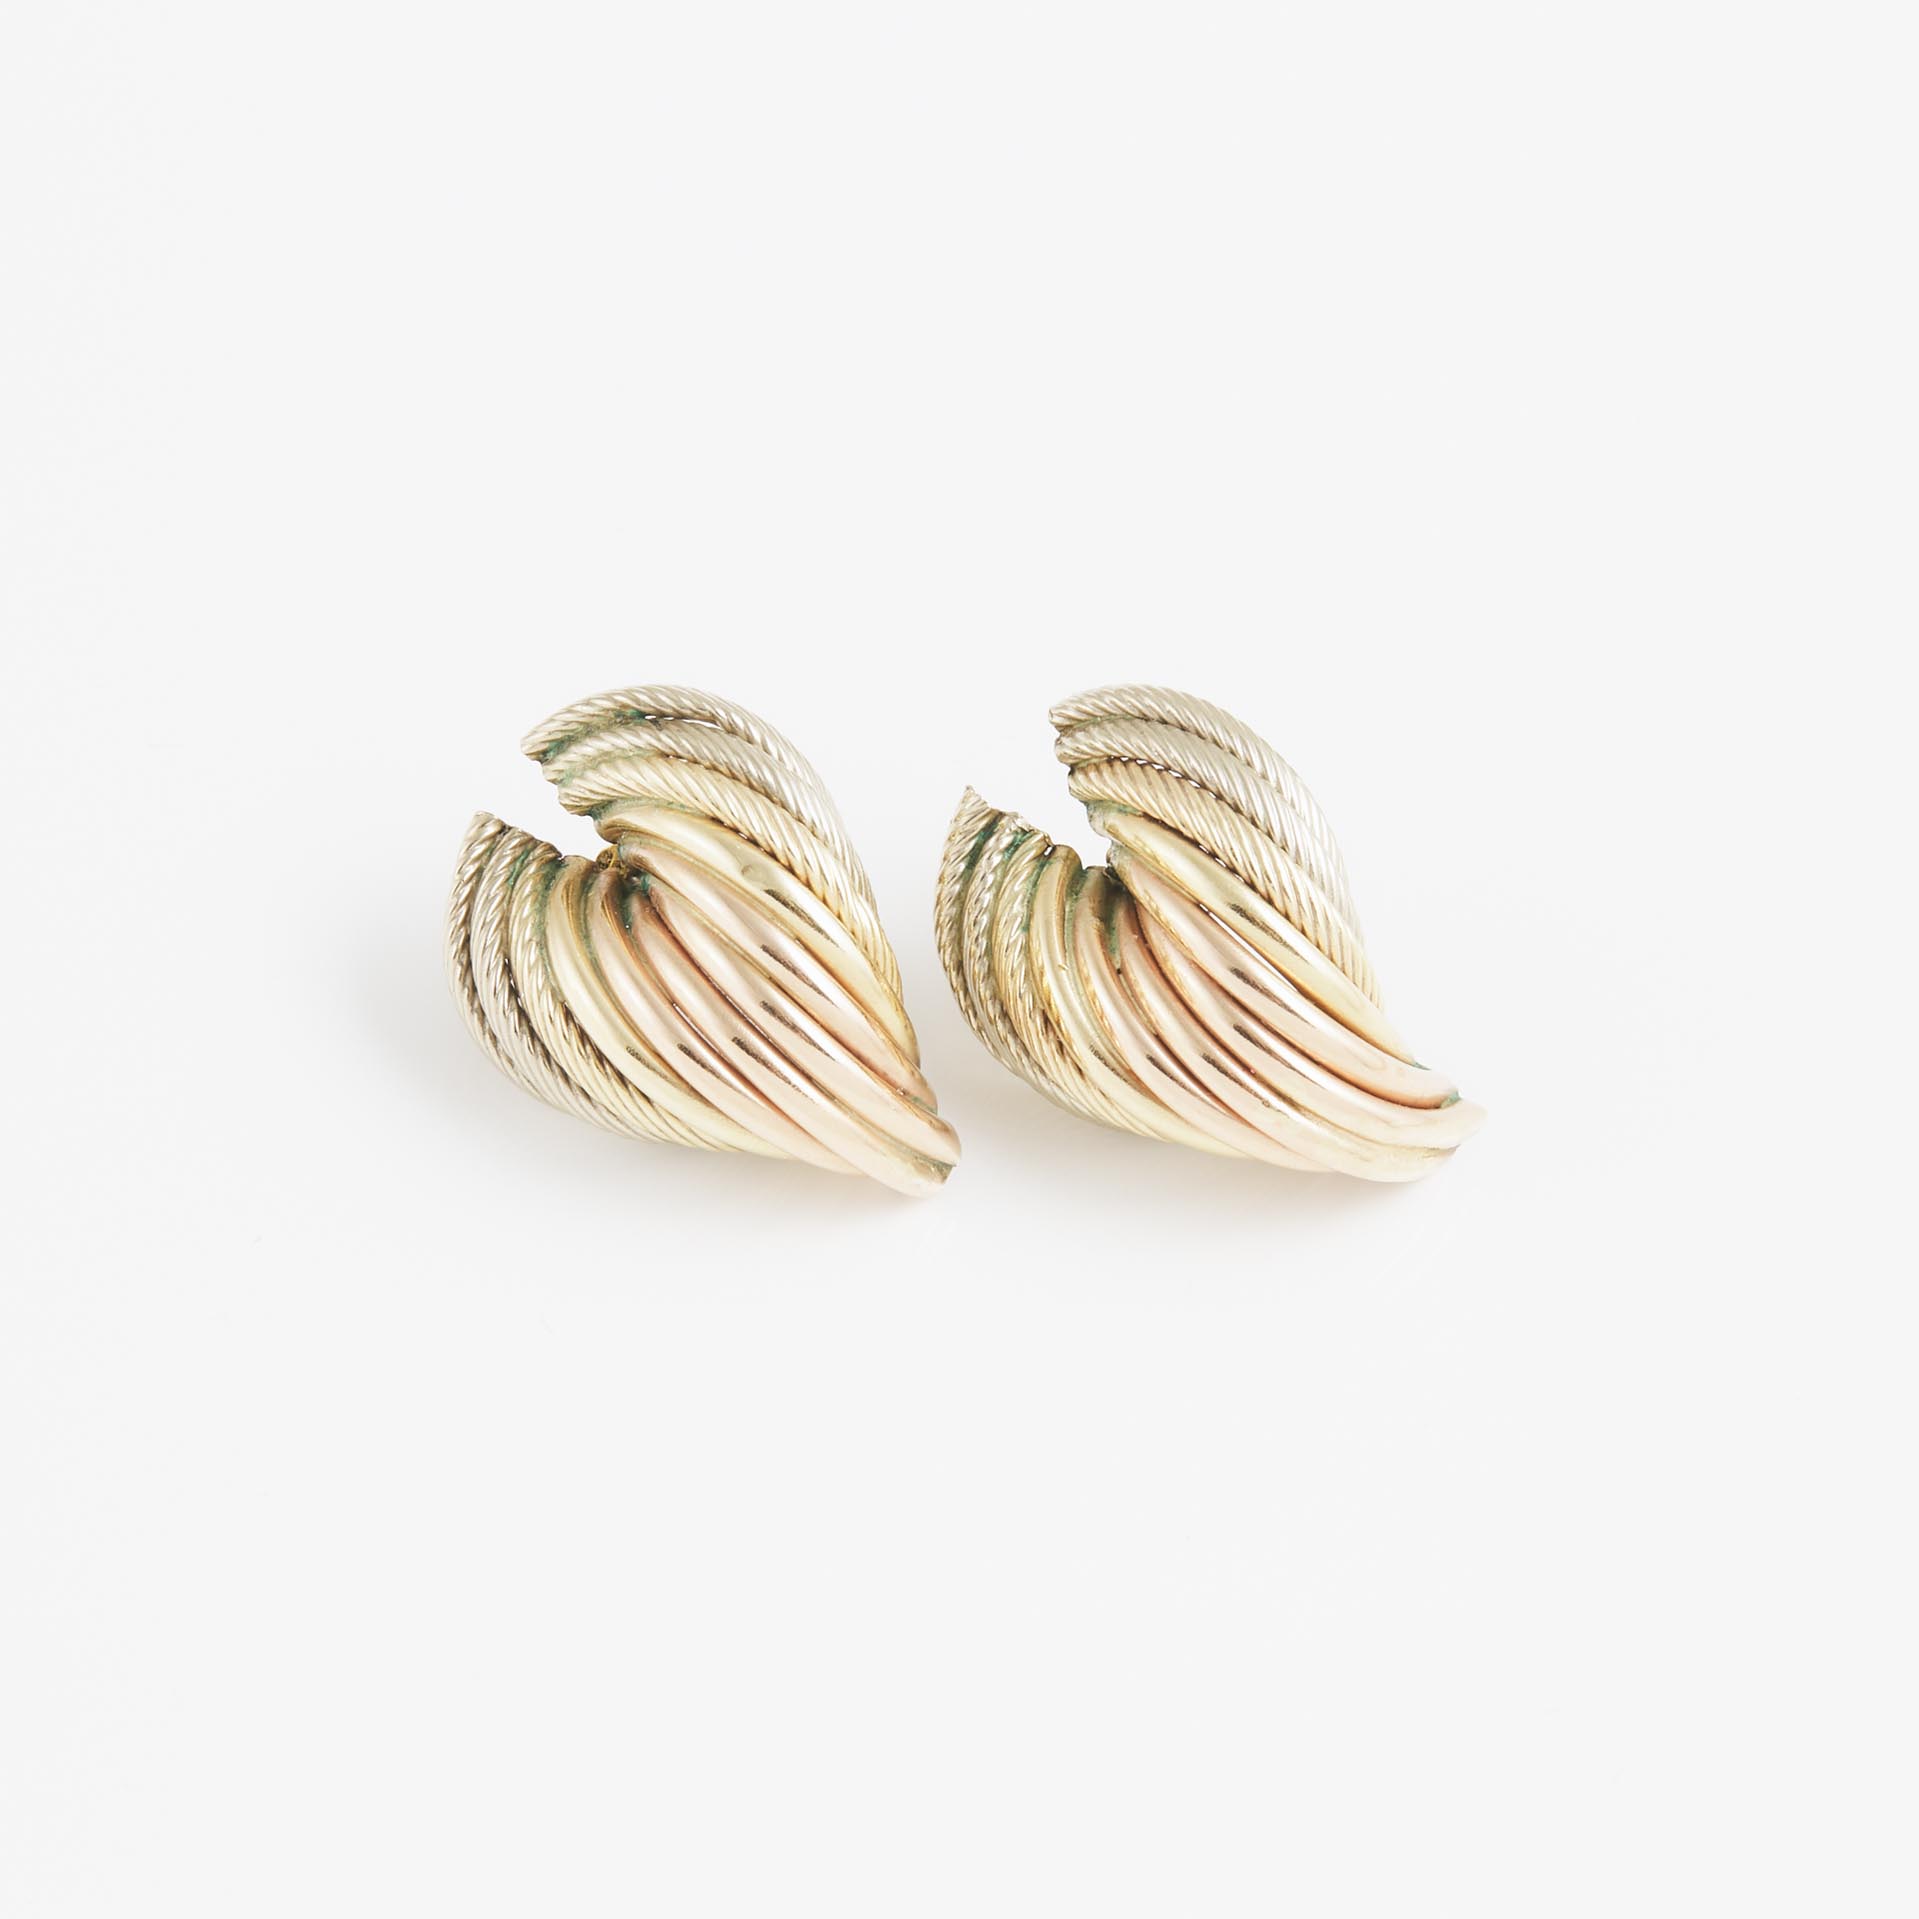 Pair Of 14k Yellow And Rose Gold Earrings